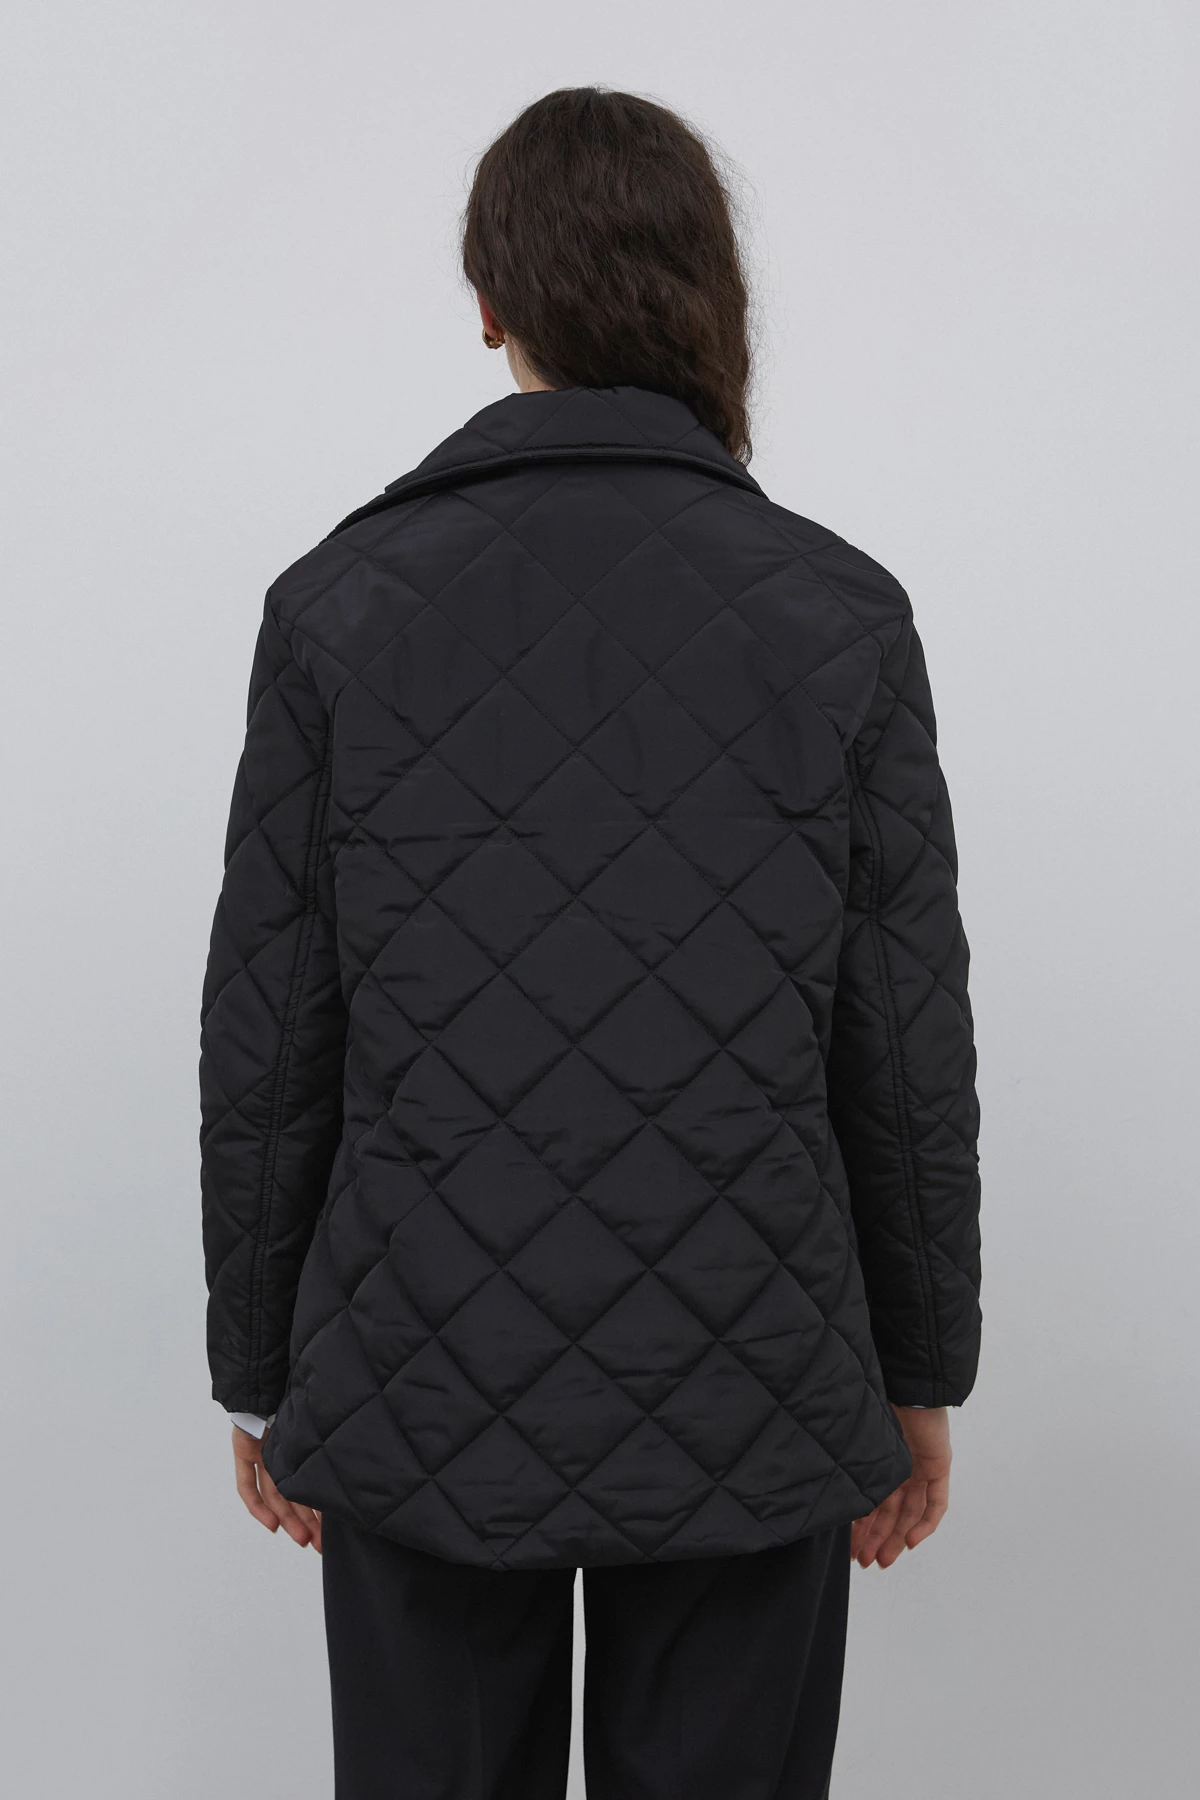 Black quilted jacket with with padding and belt, photo 7